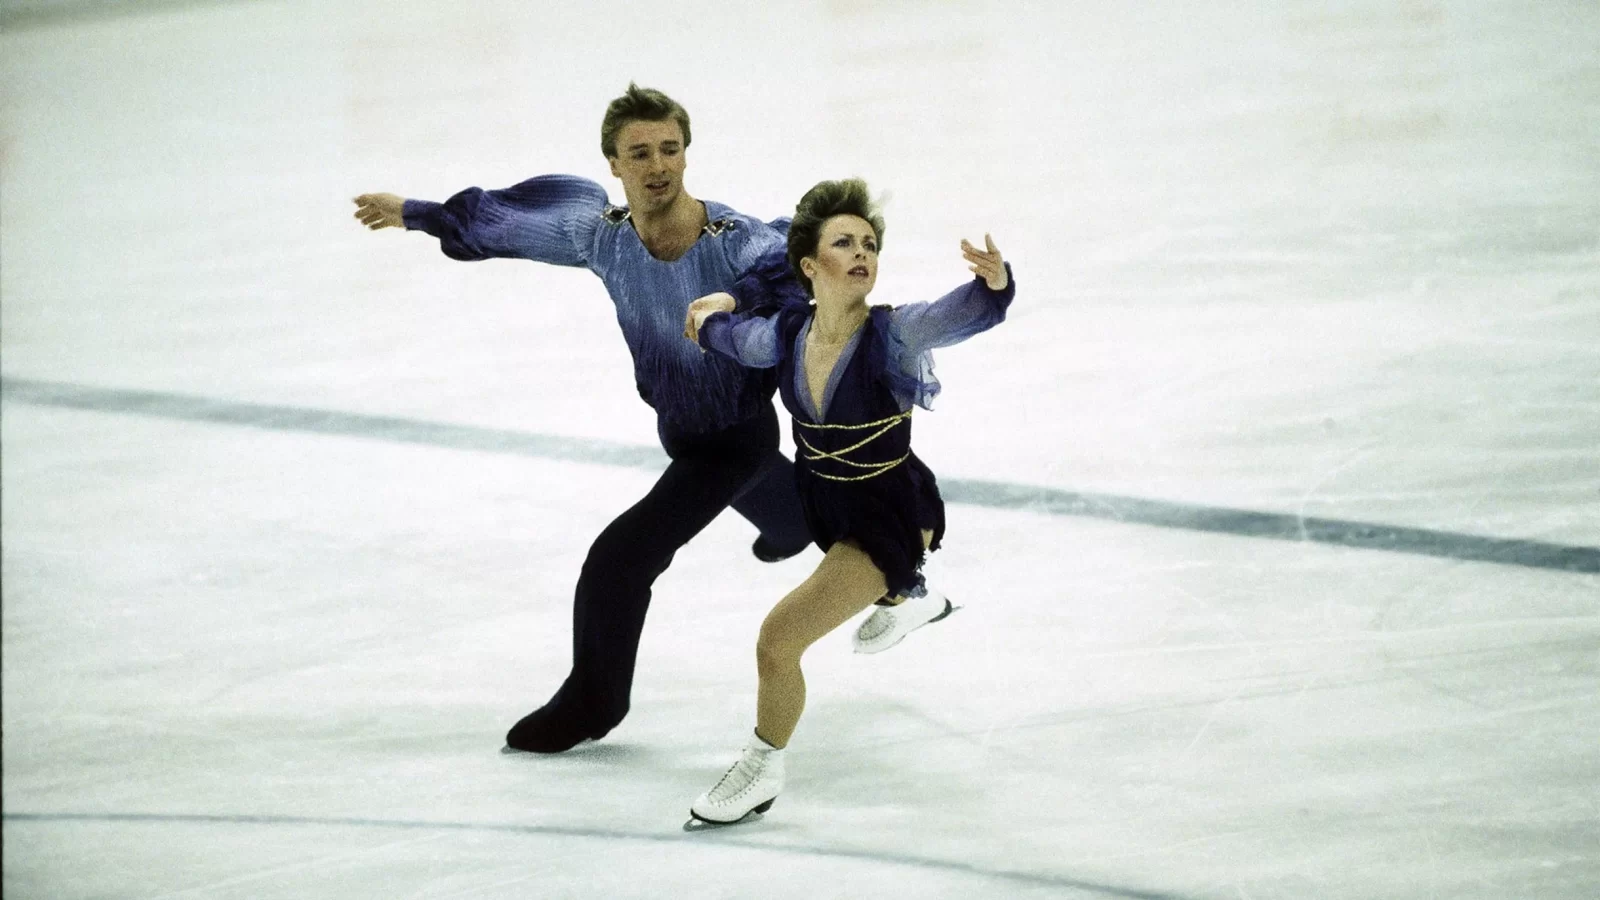 Torvill & Dean have announced their farewell tour on the anniversary of their iconic Olympics victory